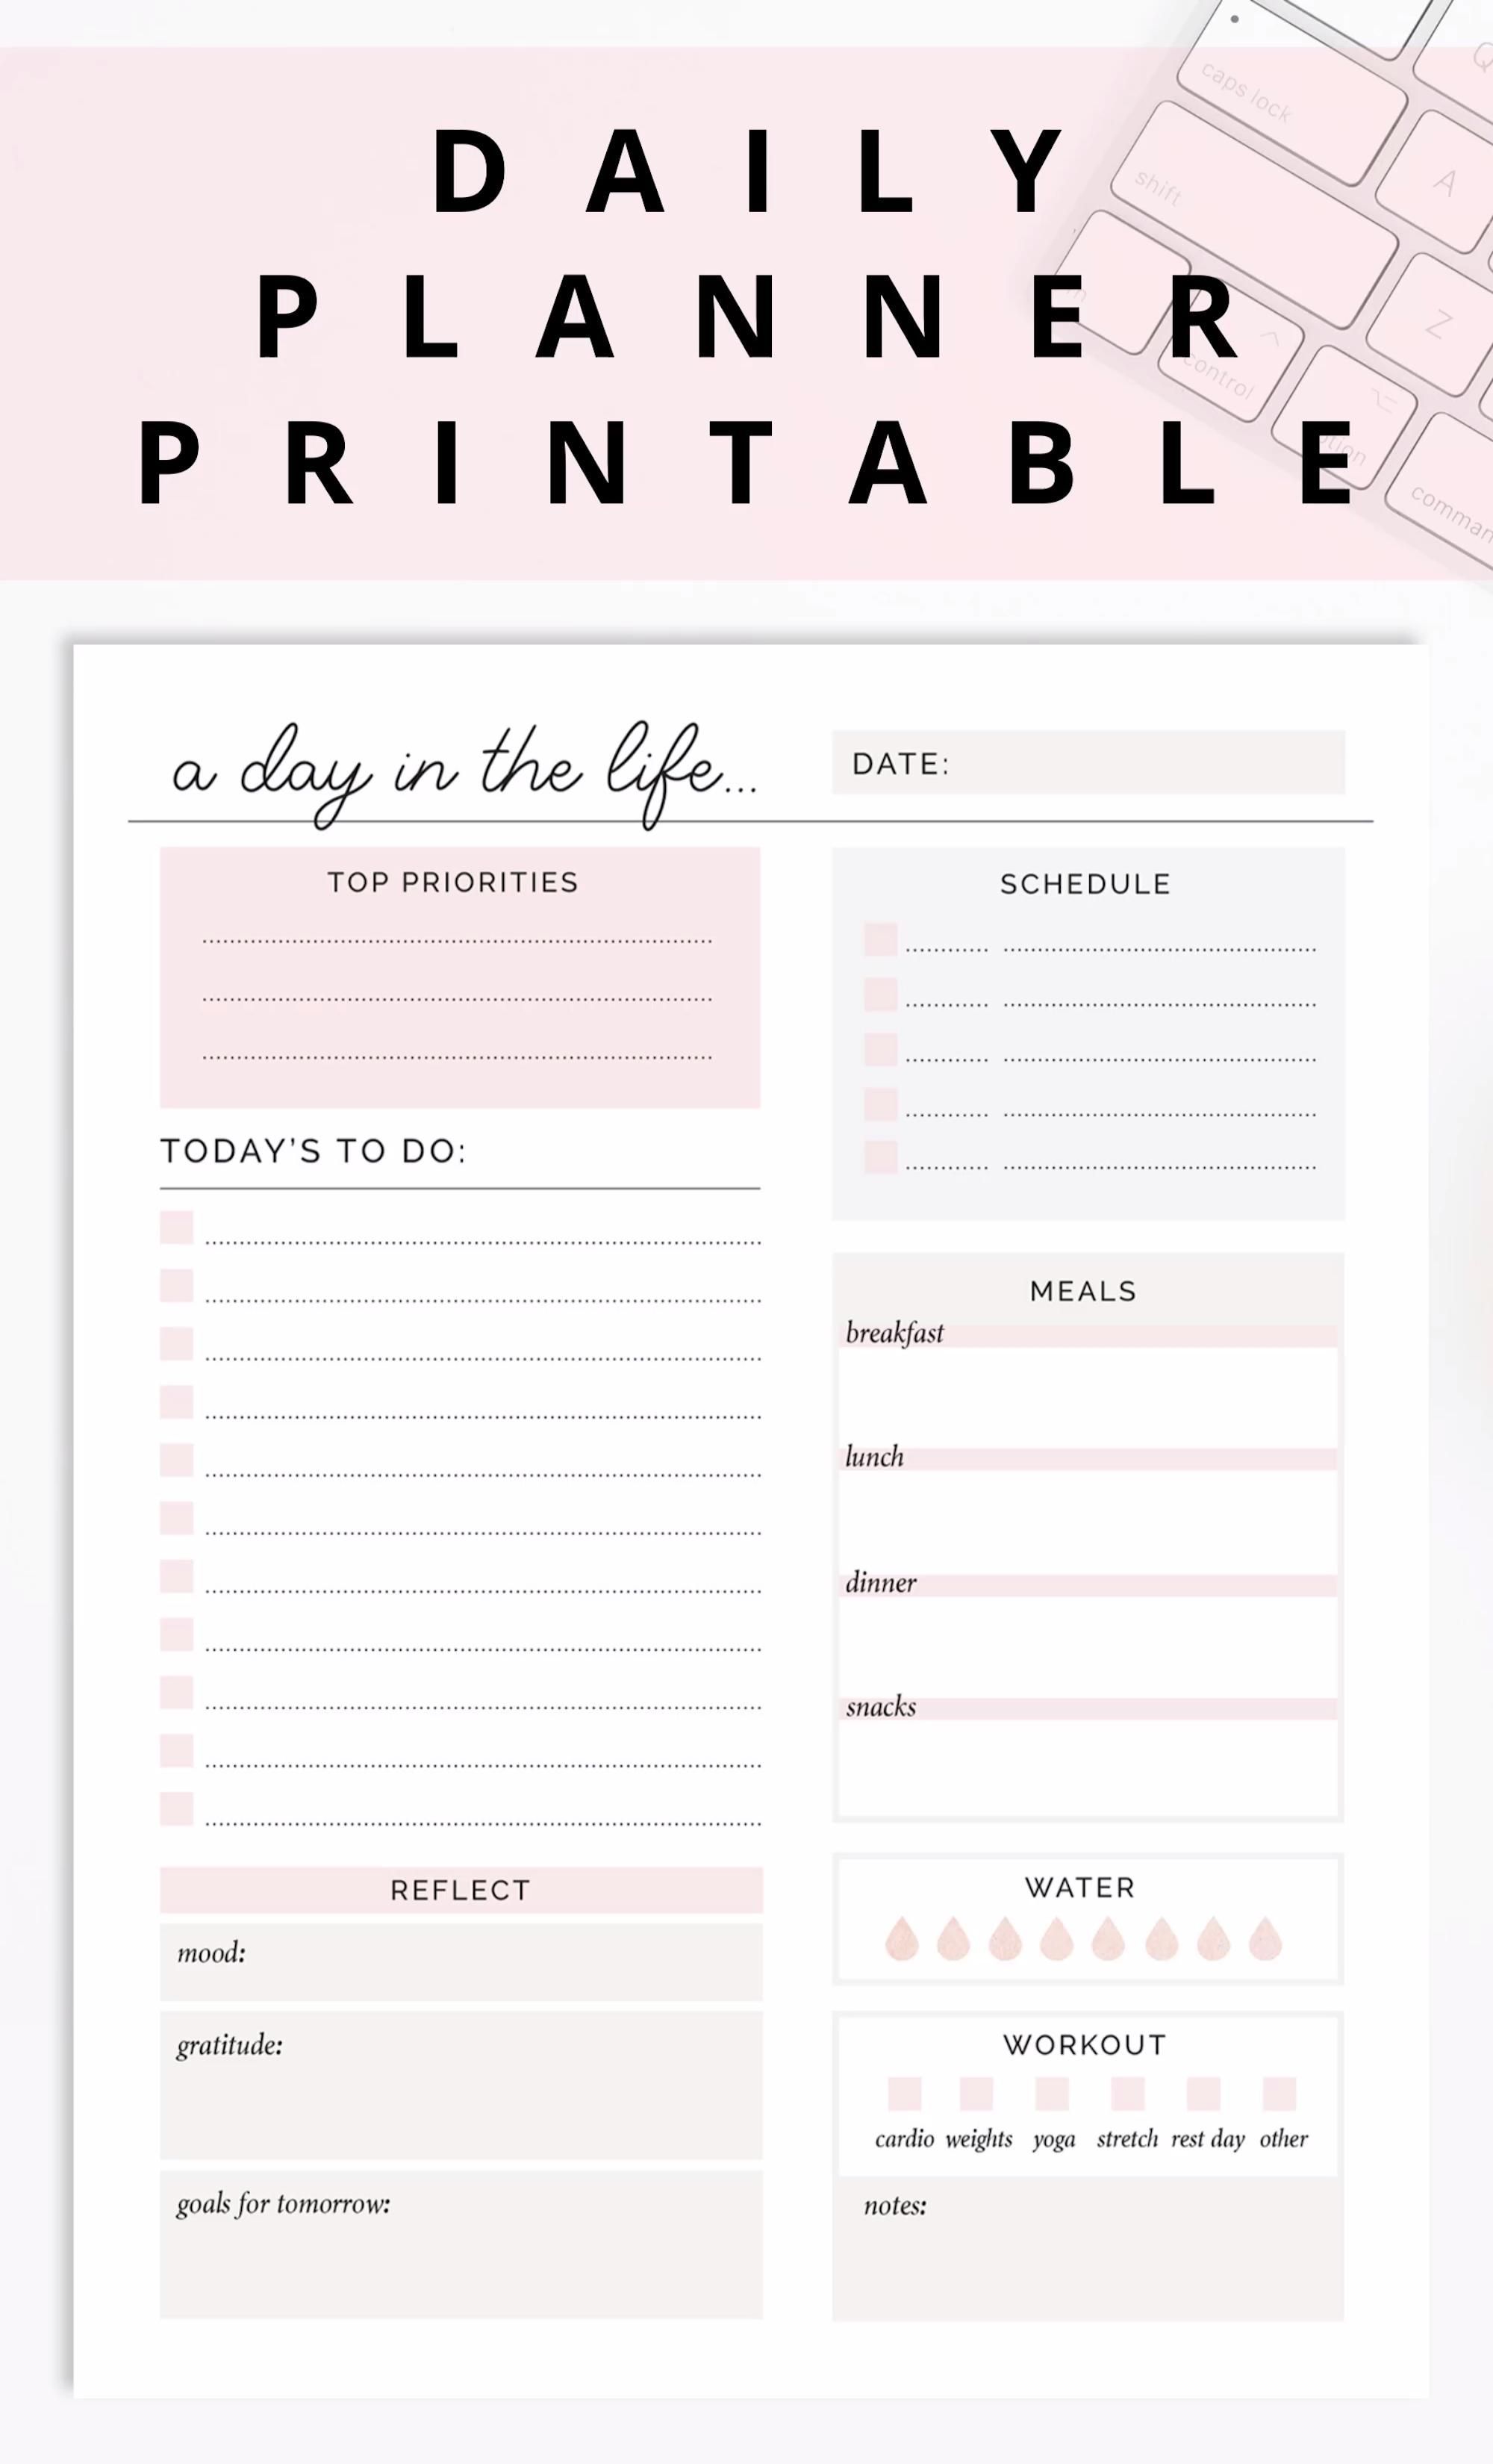 Daily Planner Printable/ Editable Daily To Do list Planner Page, Meal Planner, Fitness Goals Tracker - Daily Planner Printable/ Editable Daily To Do list Planner Page, Meal Planner, Fitness Goals Tracker -   17 fitness Planner printable ideas